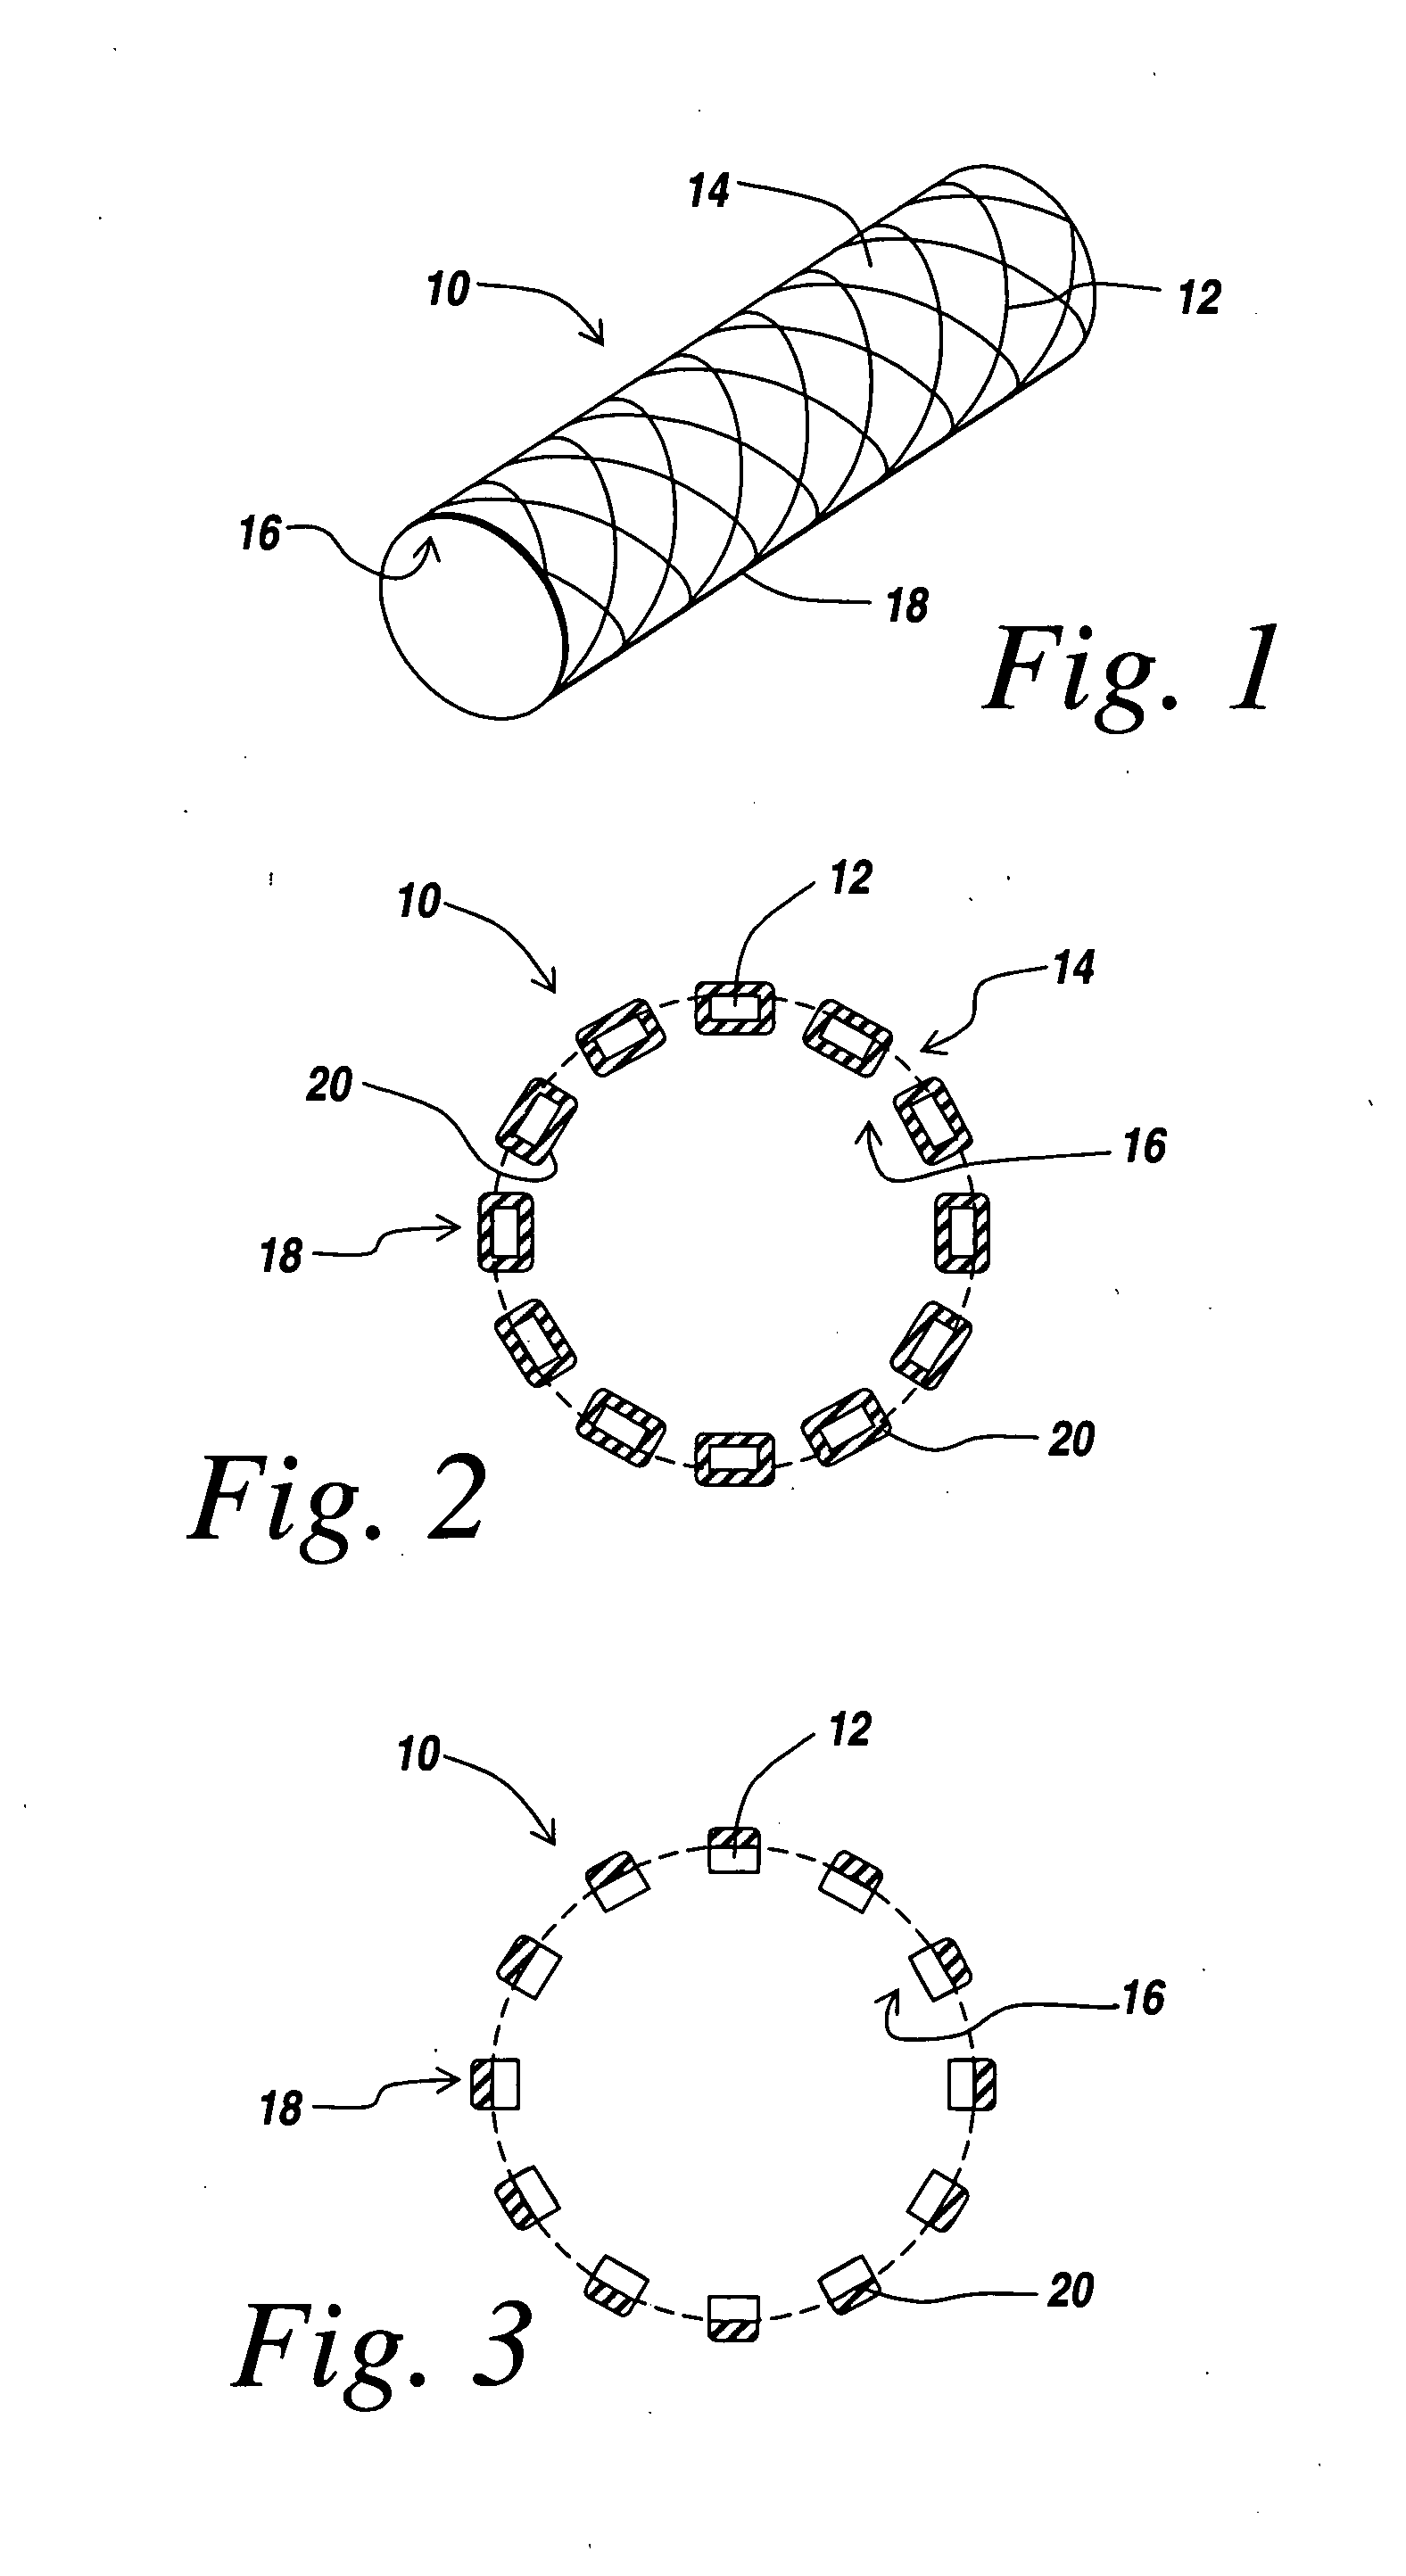 Reducing template with coating receptacle containing a medical device to be coated